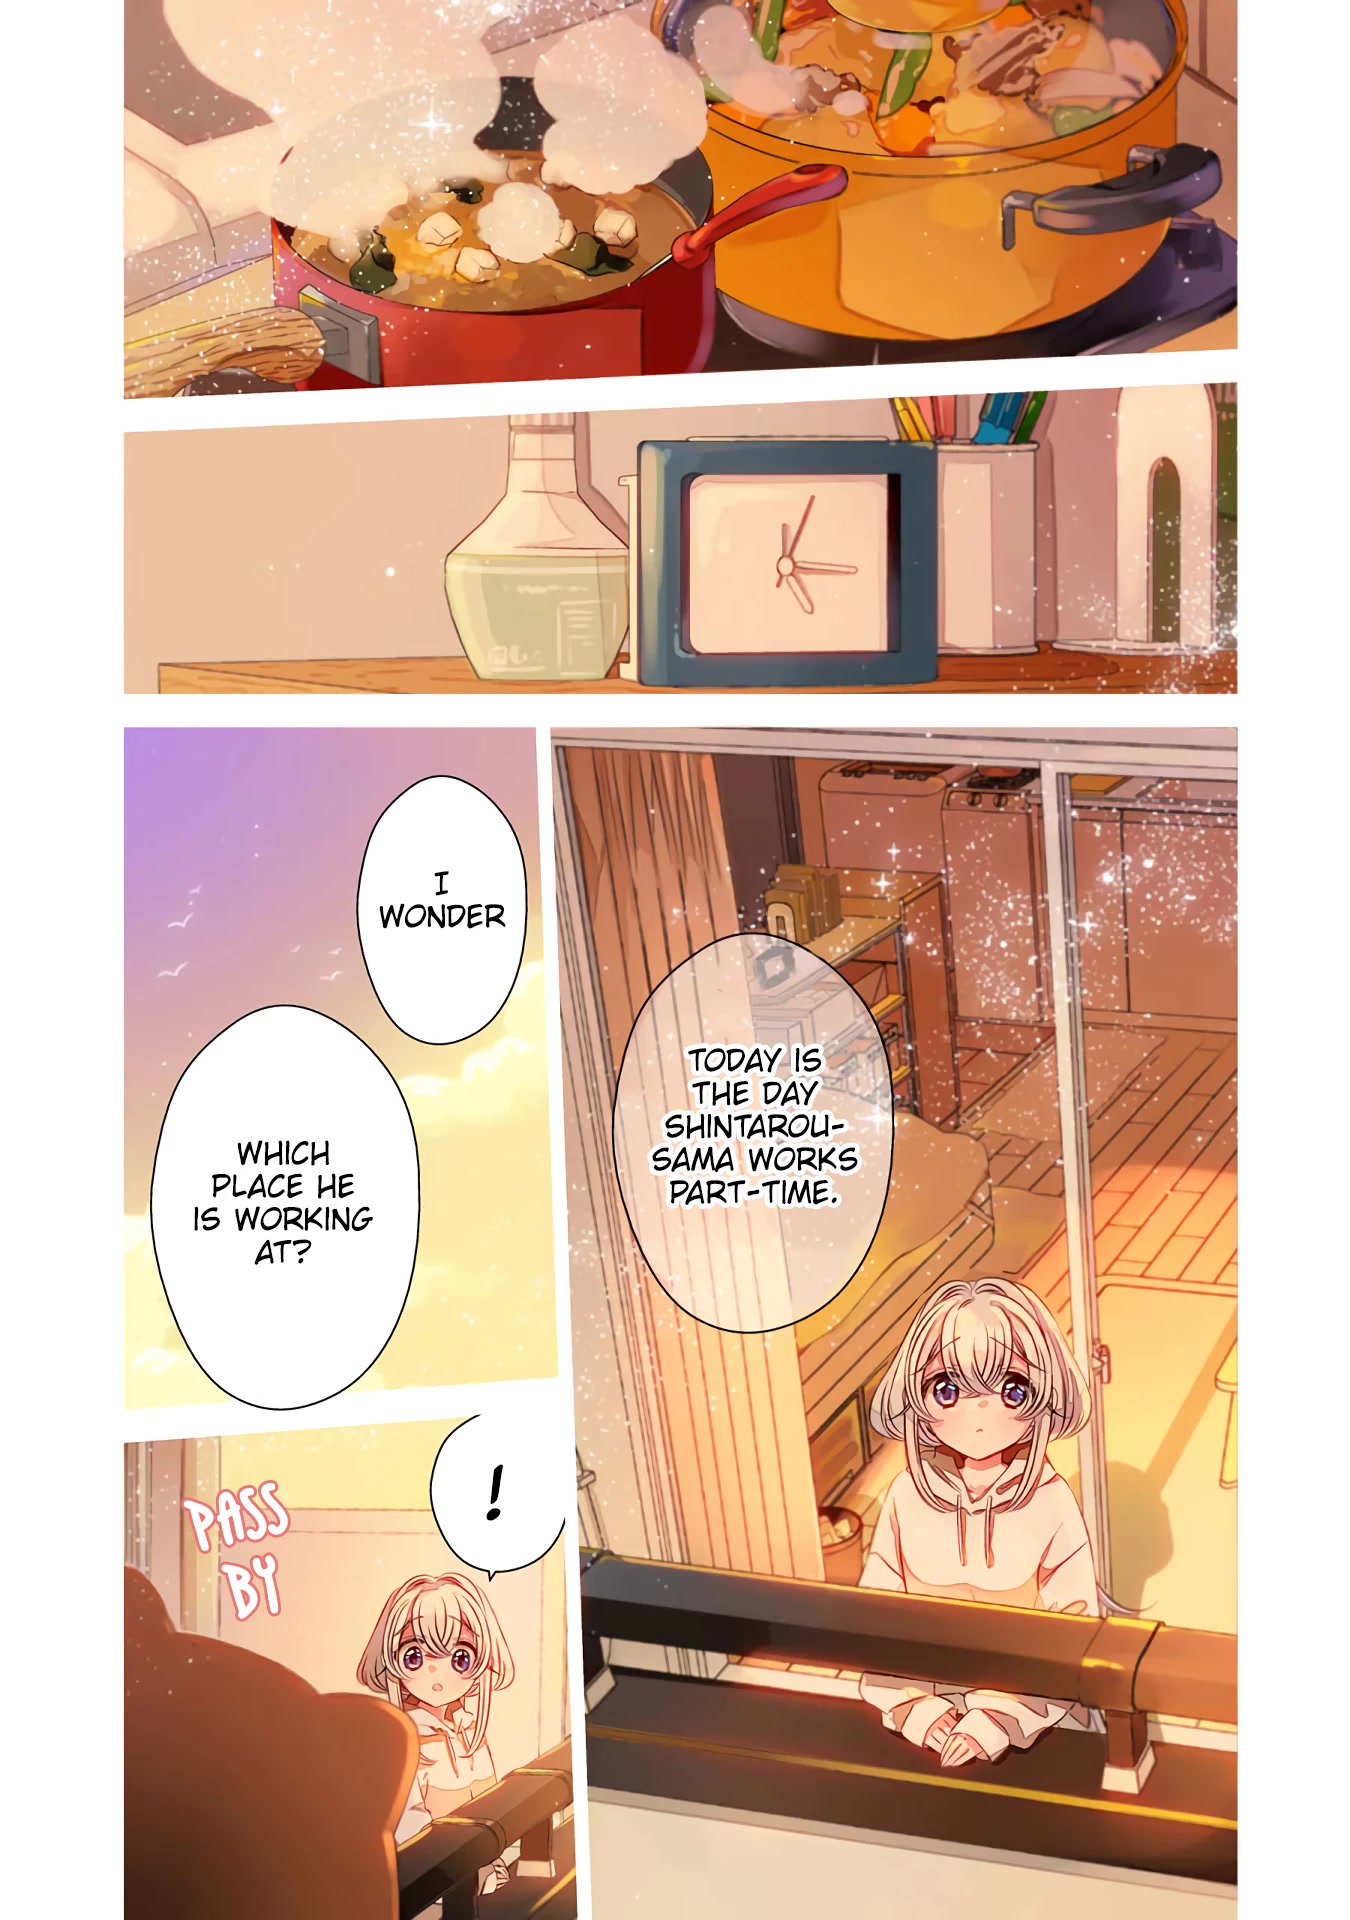 Studio Apartment, Good Lighting, Angel Included. - Page 2